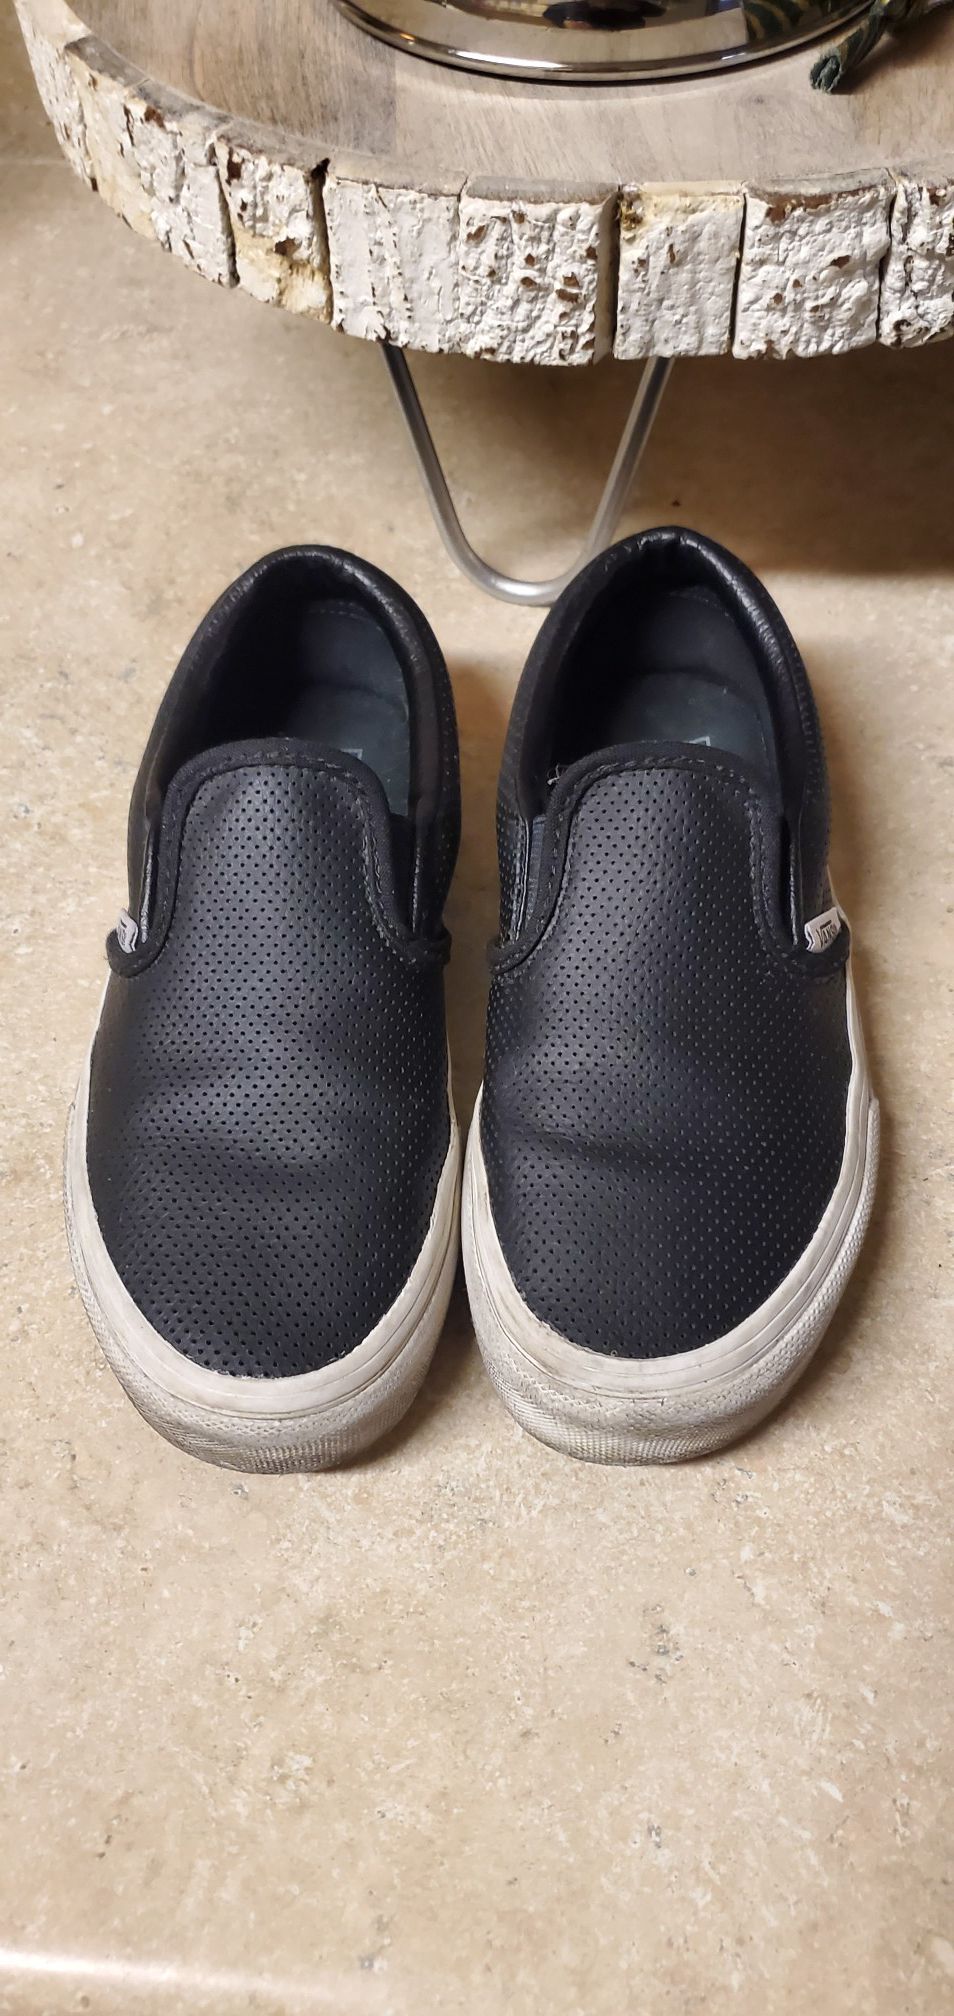 Black leather perforated Vans size 2y